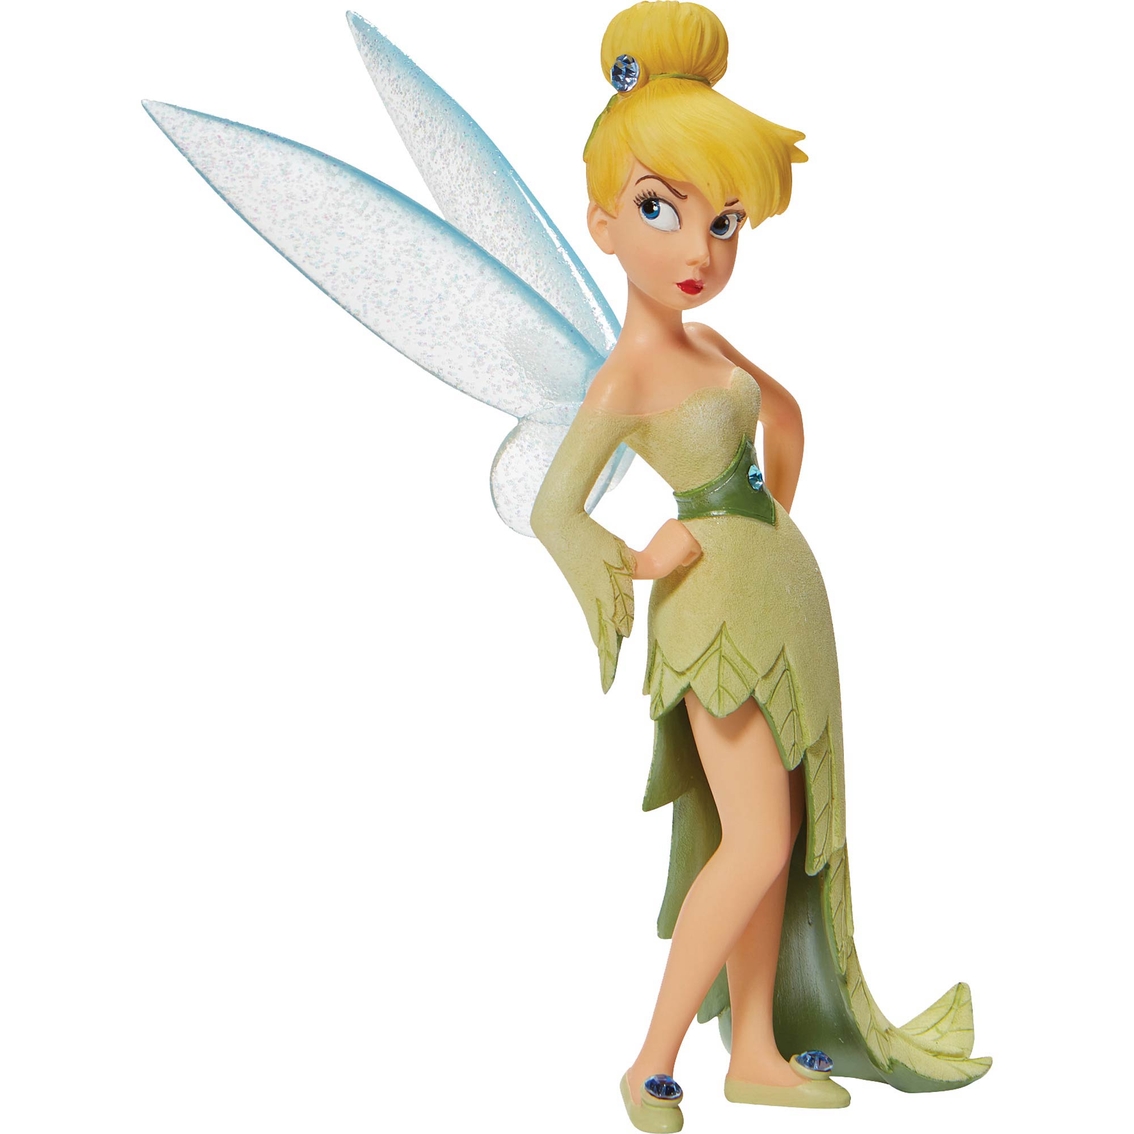 Disney Showcase Couture de Force Tinker Bell Figurine - Image 2 of 4